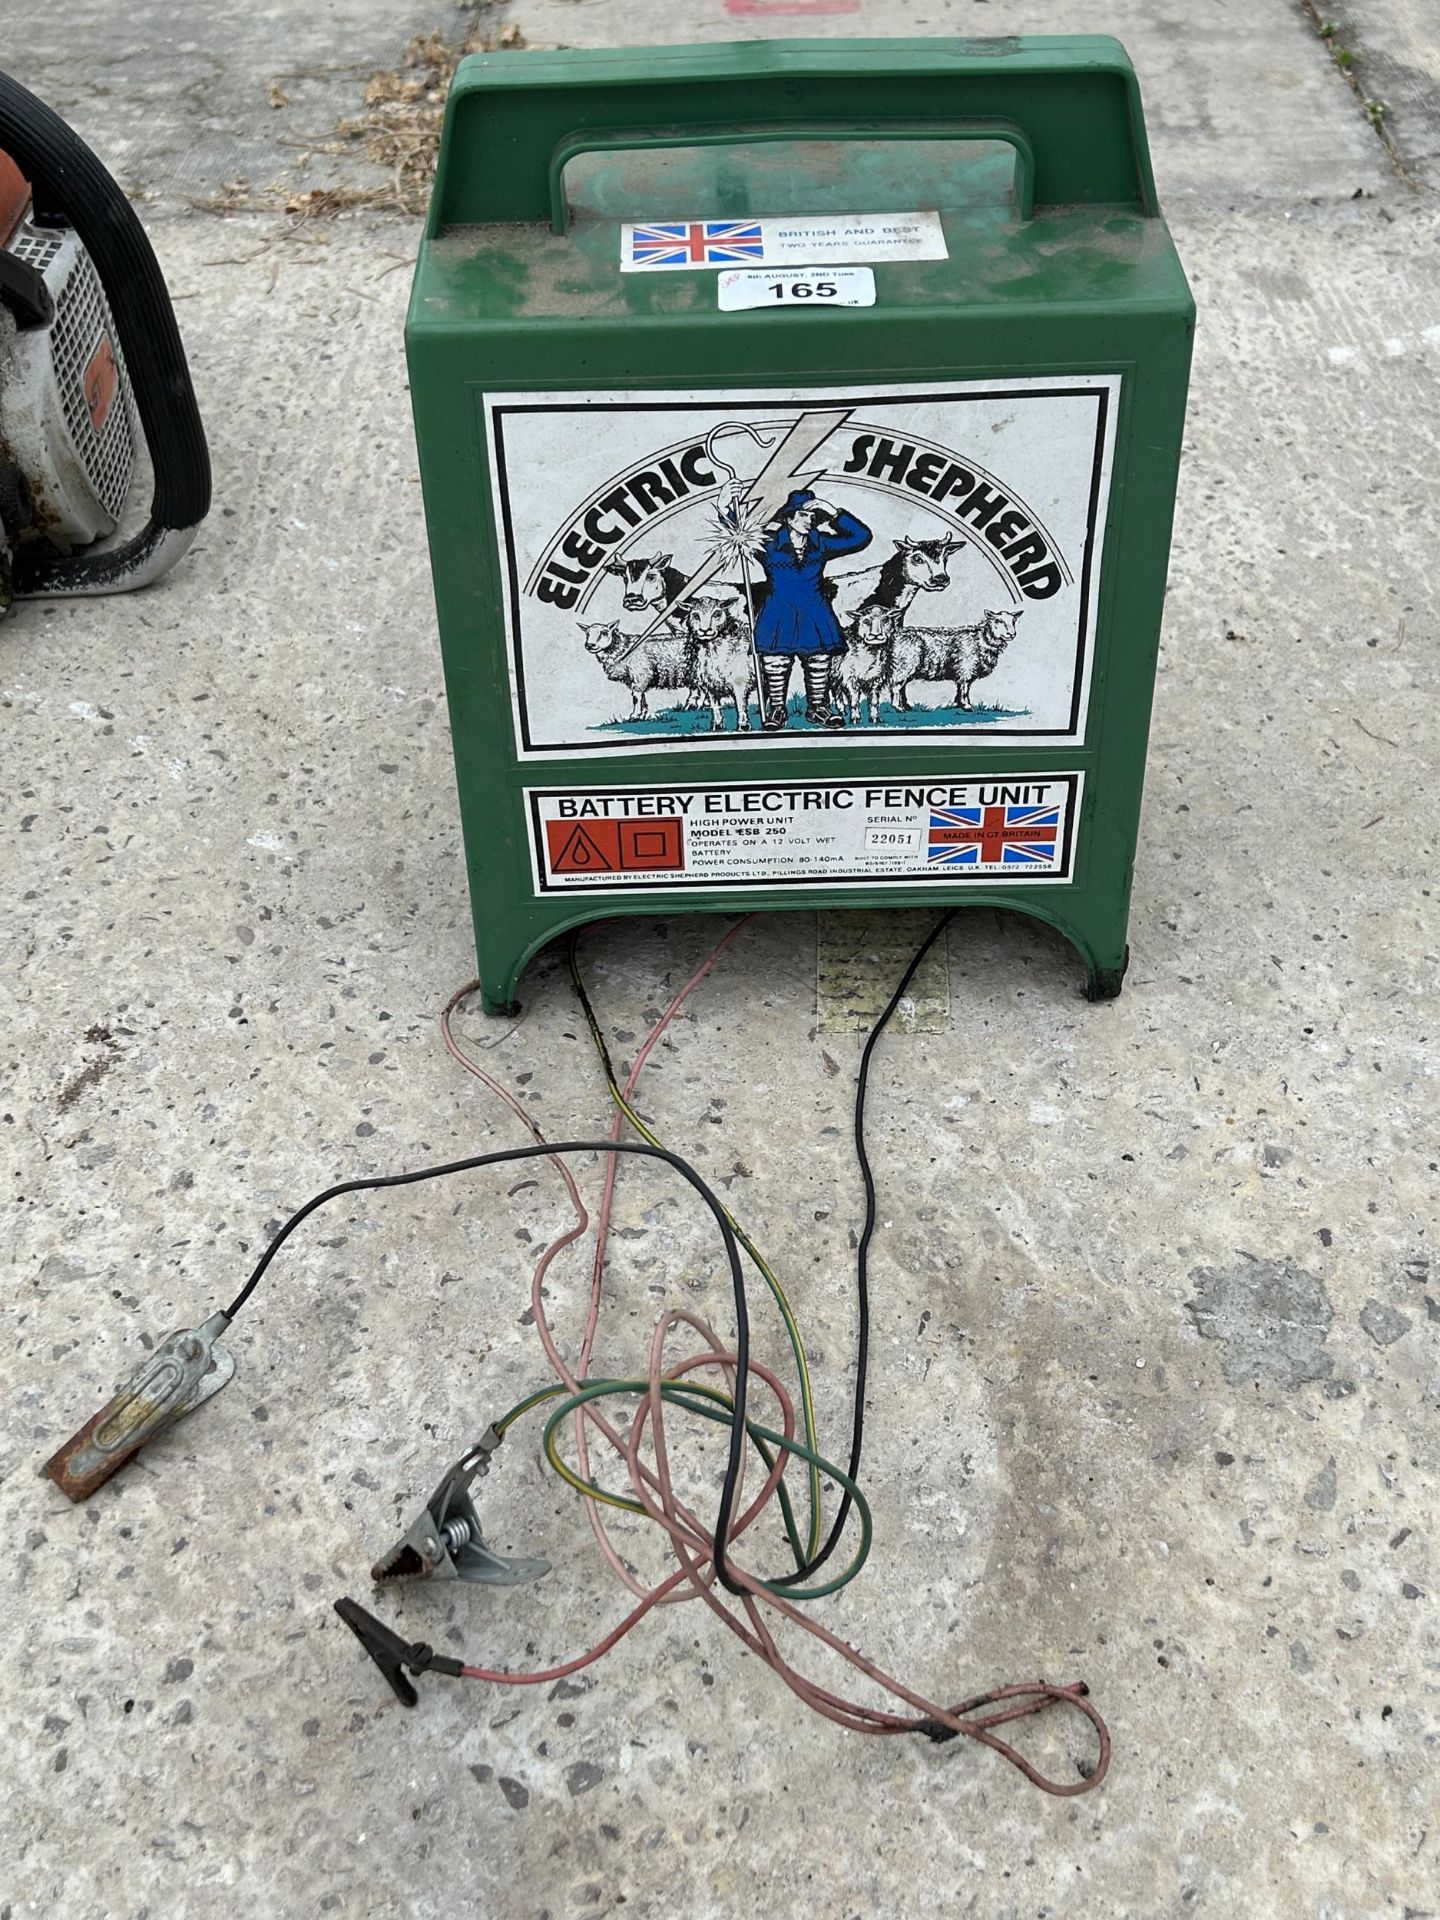 A SHEPARD BATTERY ELECTRIC FENCE UNIT, BELIEVED TO BE IN GOOD WORKING ORDER BUT NO WARRANTY